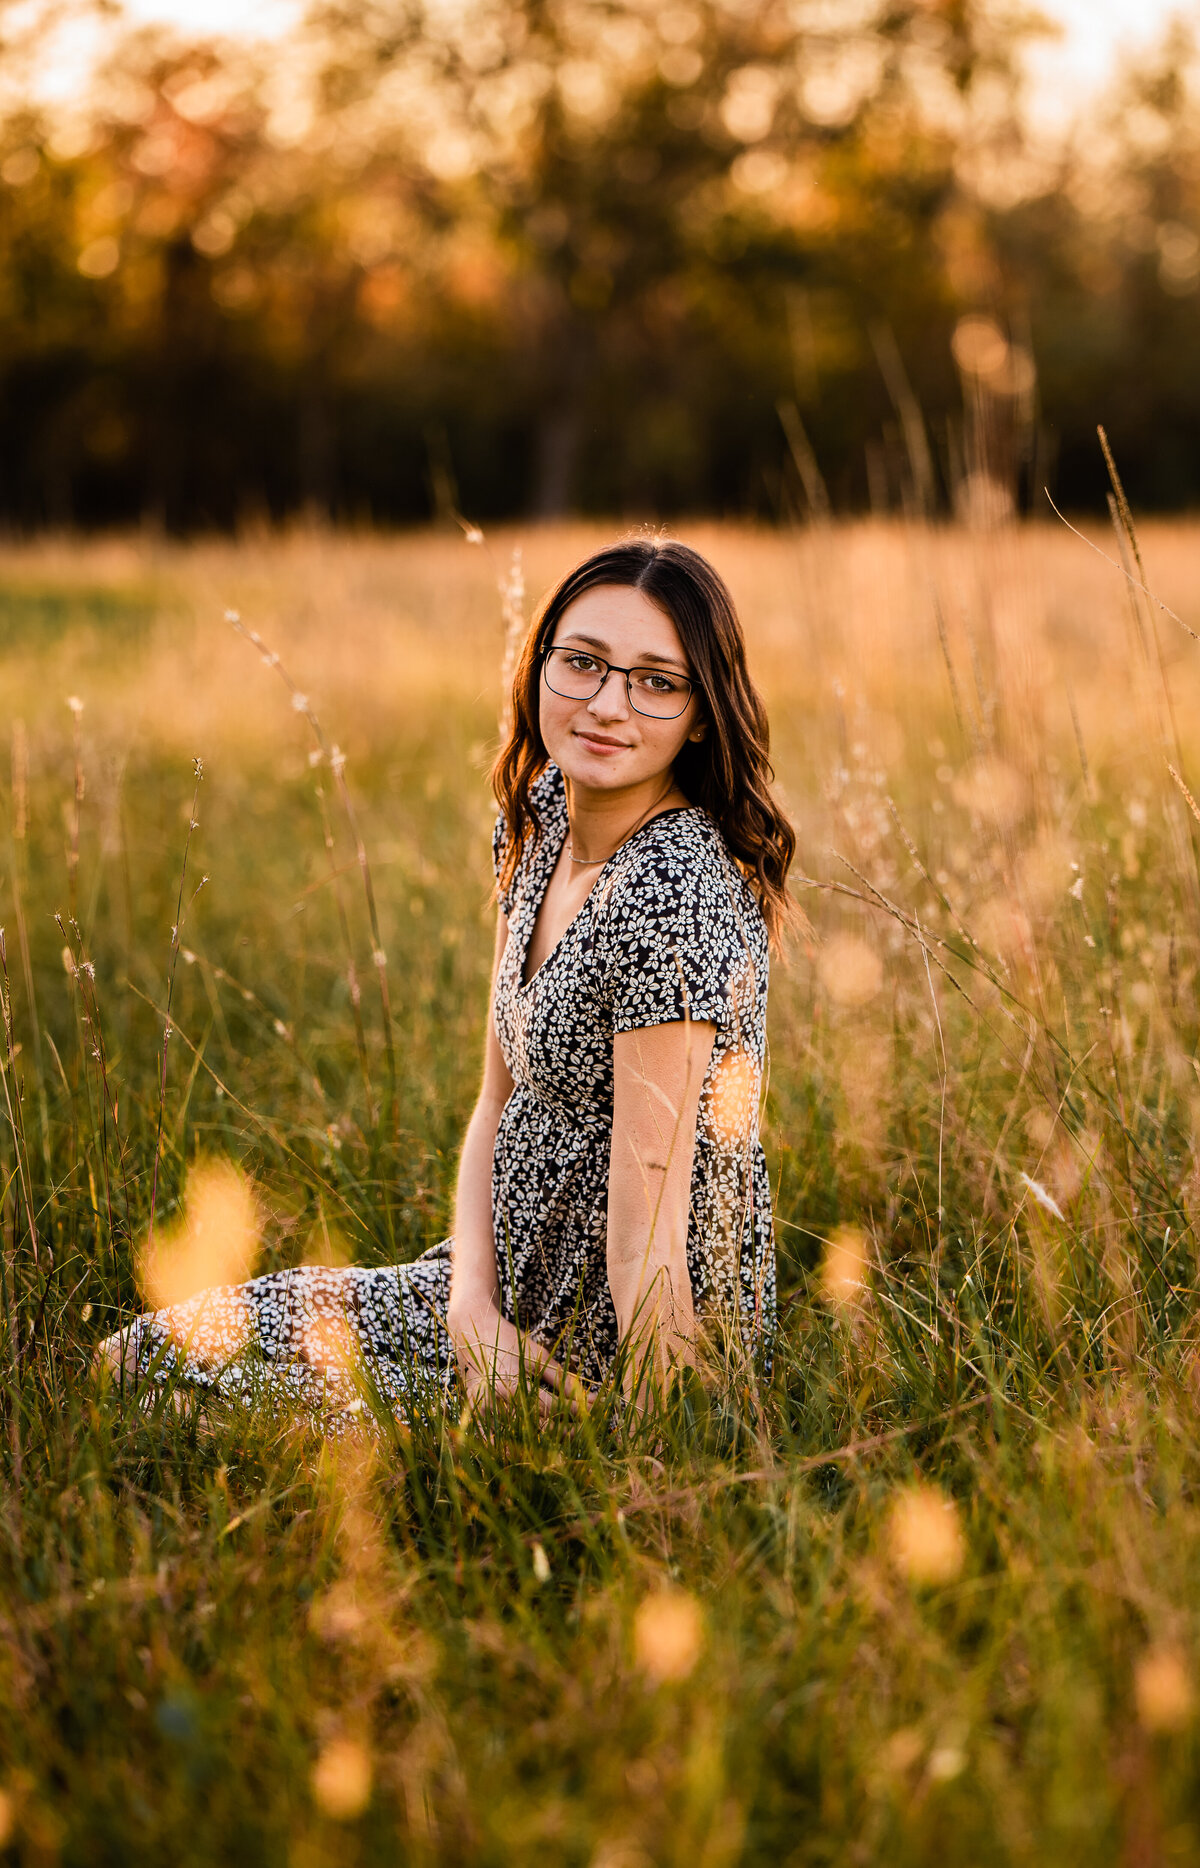 A girl graduate sits in a field of golden grass at sunset and smiles at the camera.